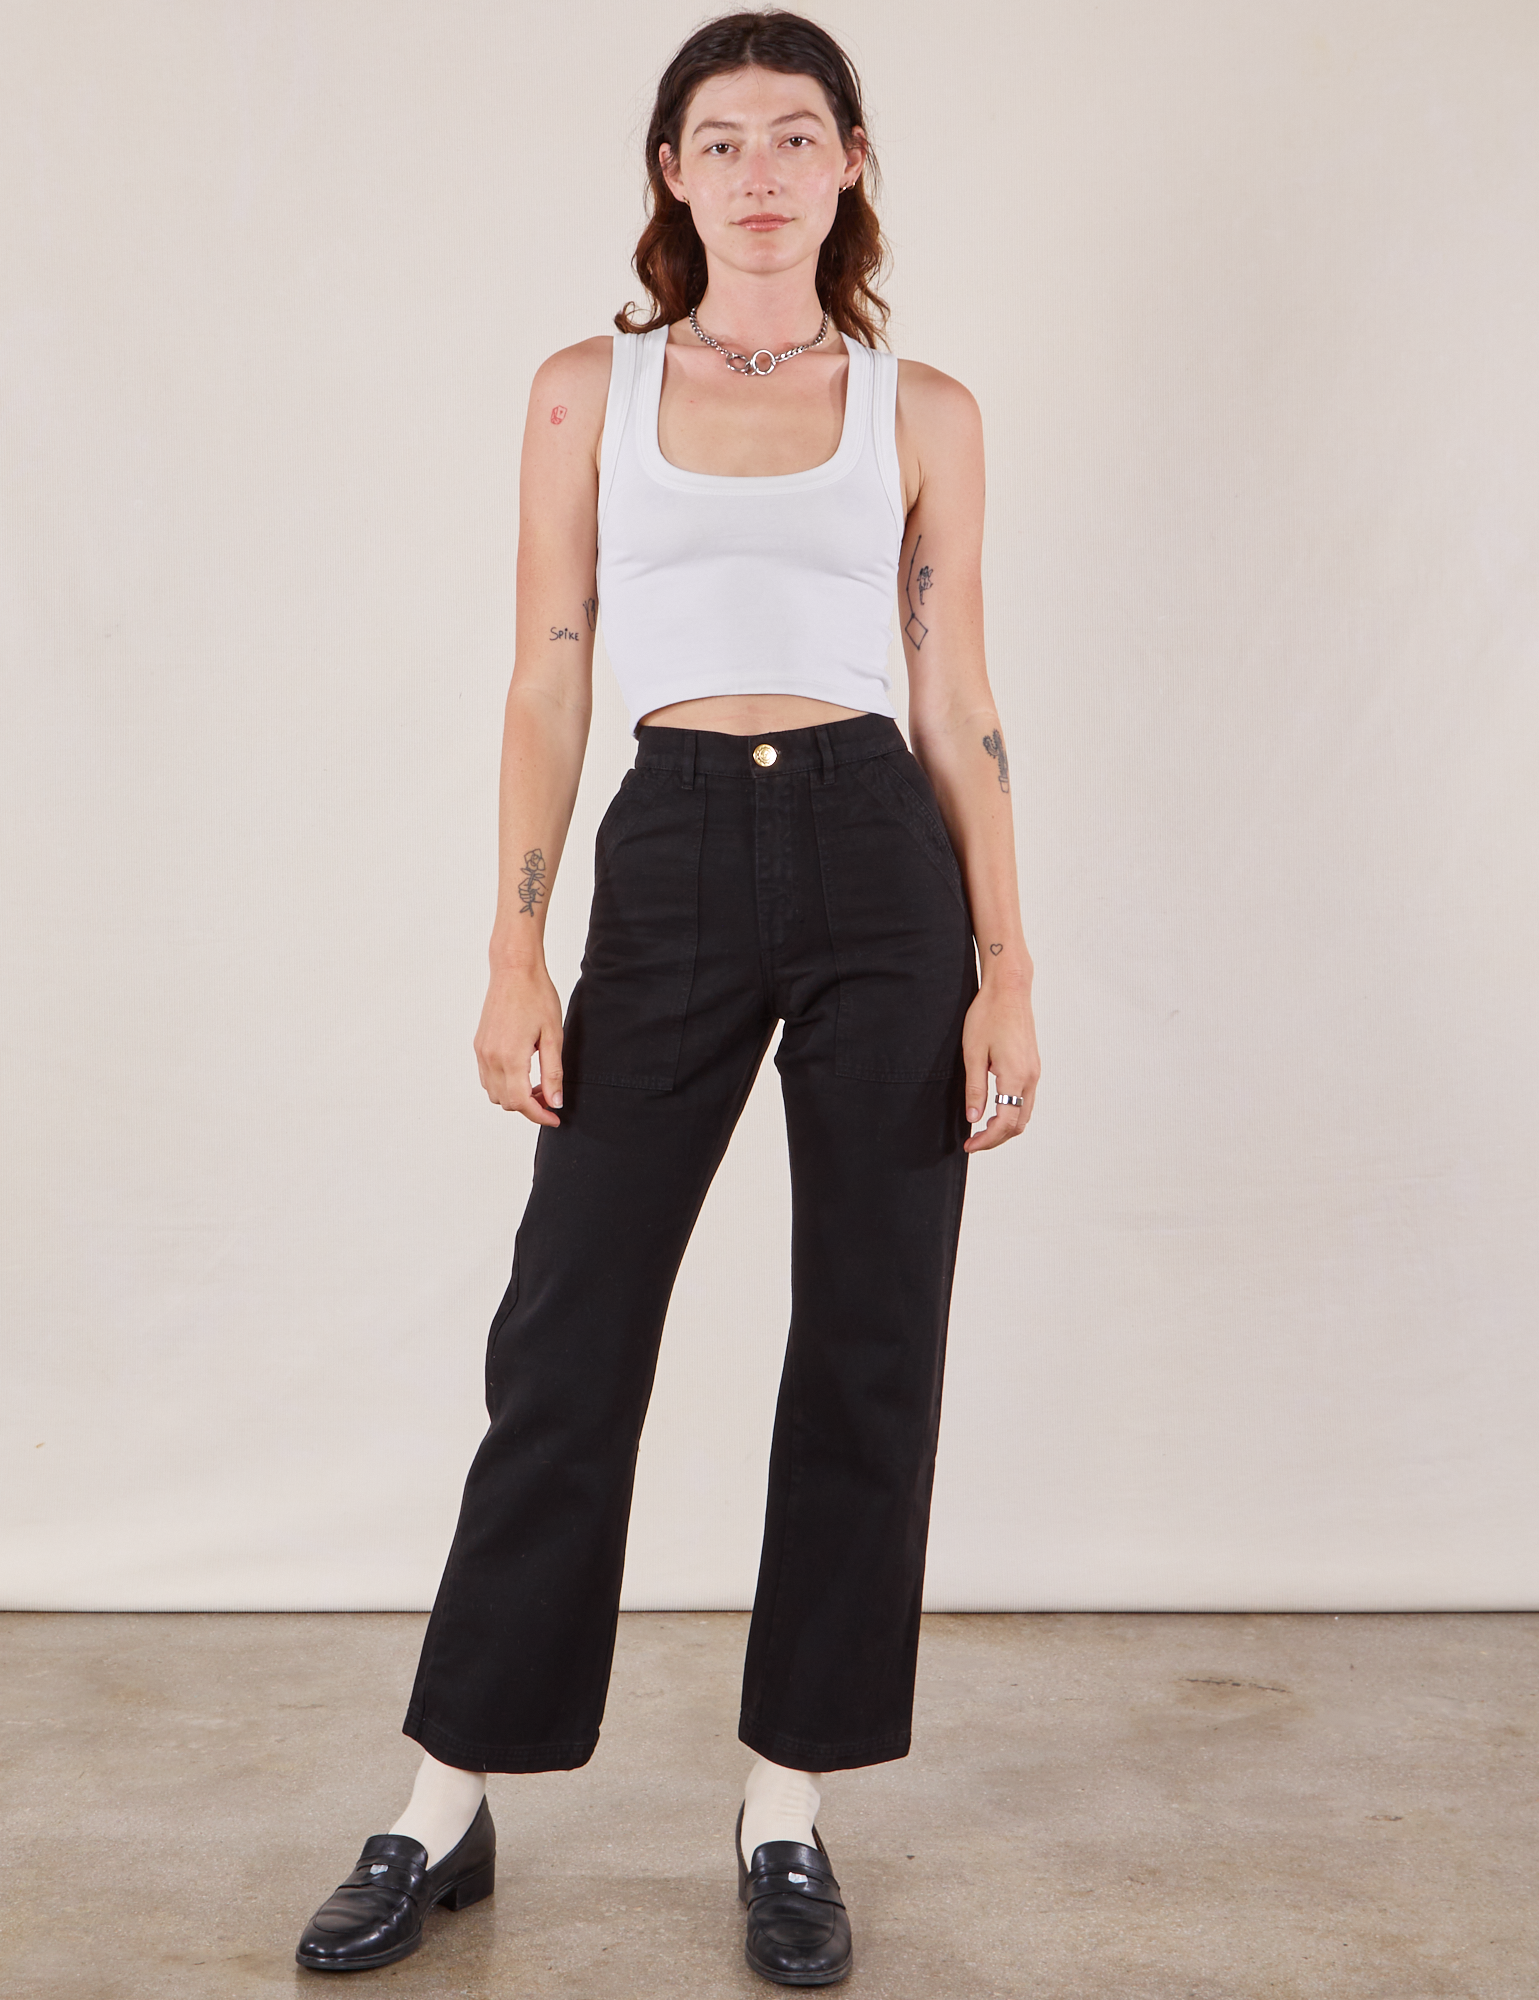 Alex is wearing Work Pants in Black and a Cropped Tank in vintage tee off-white